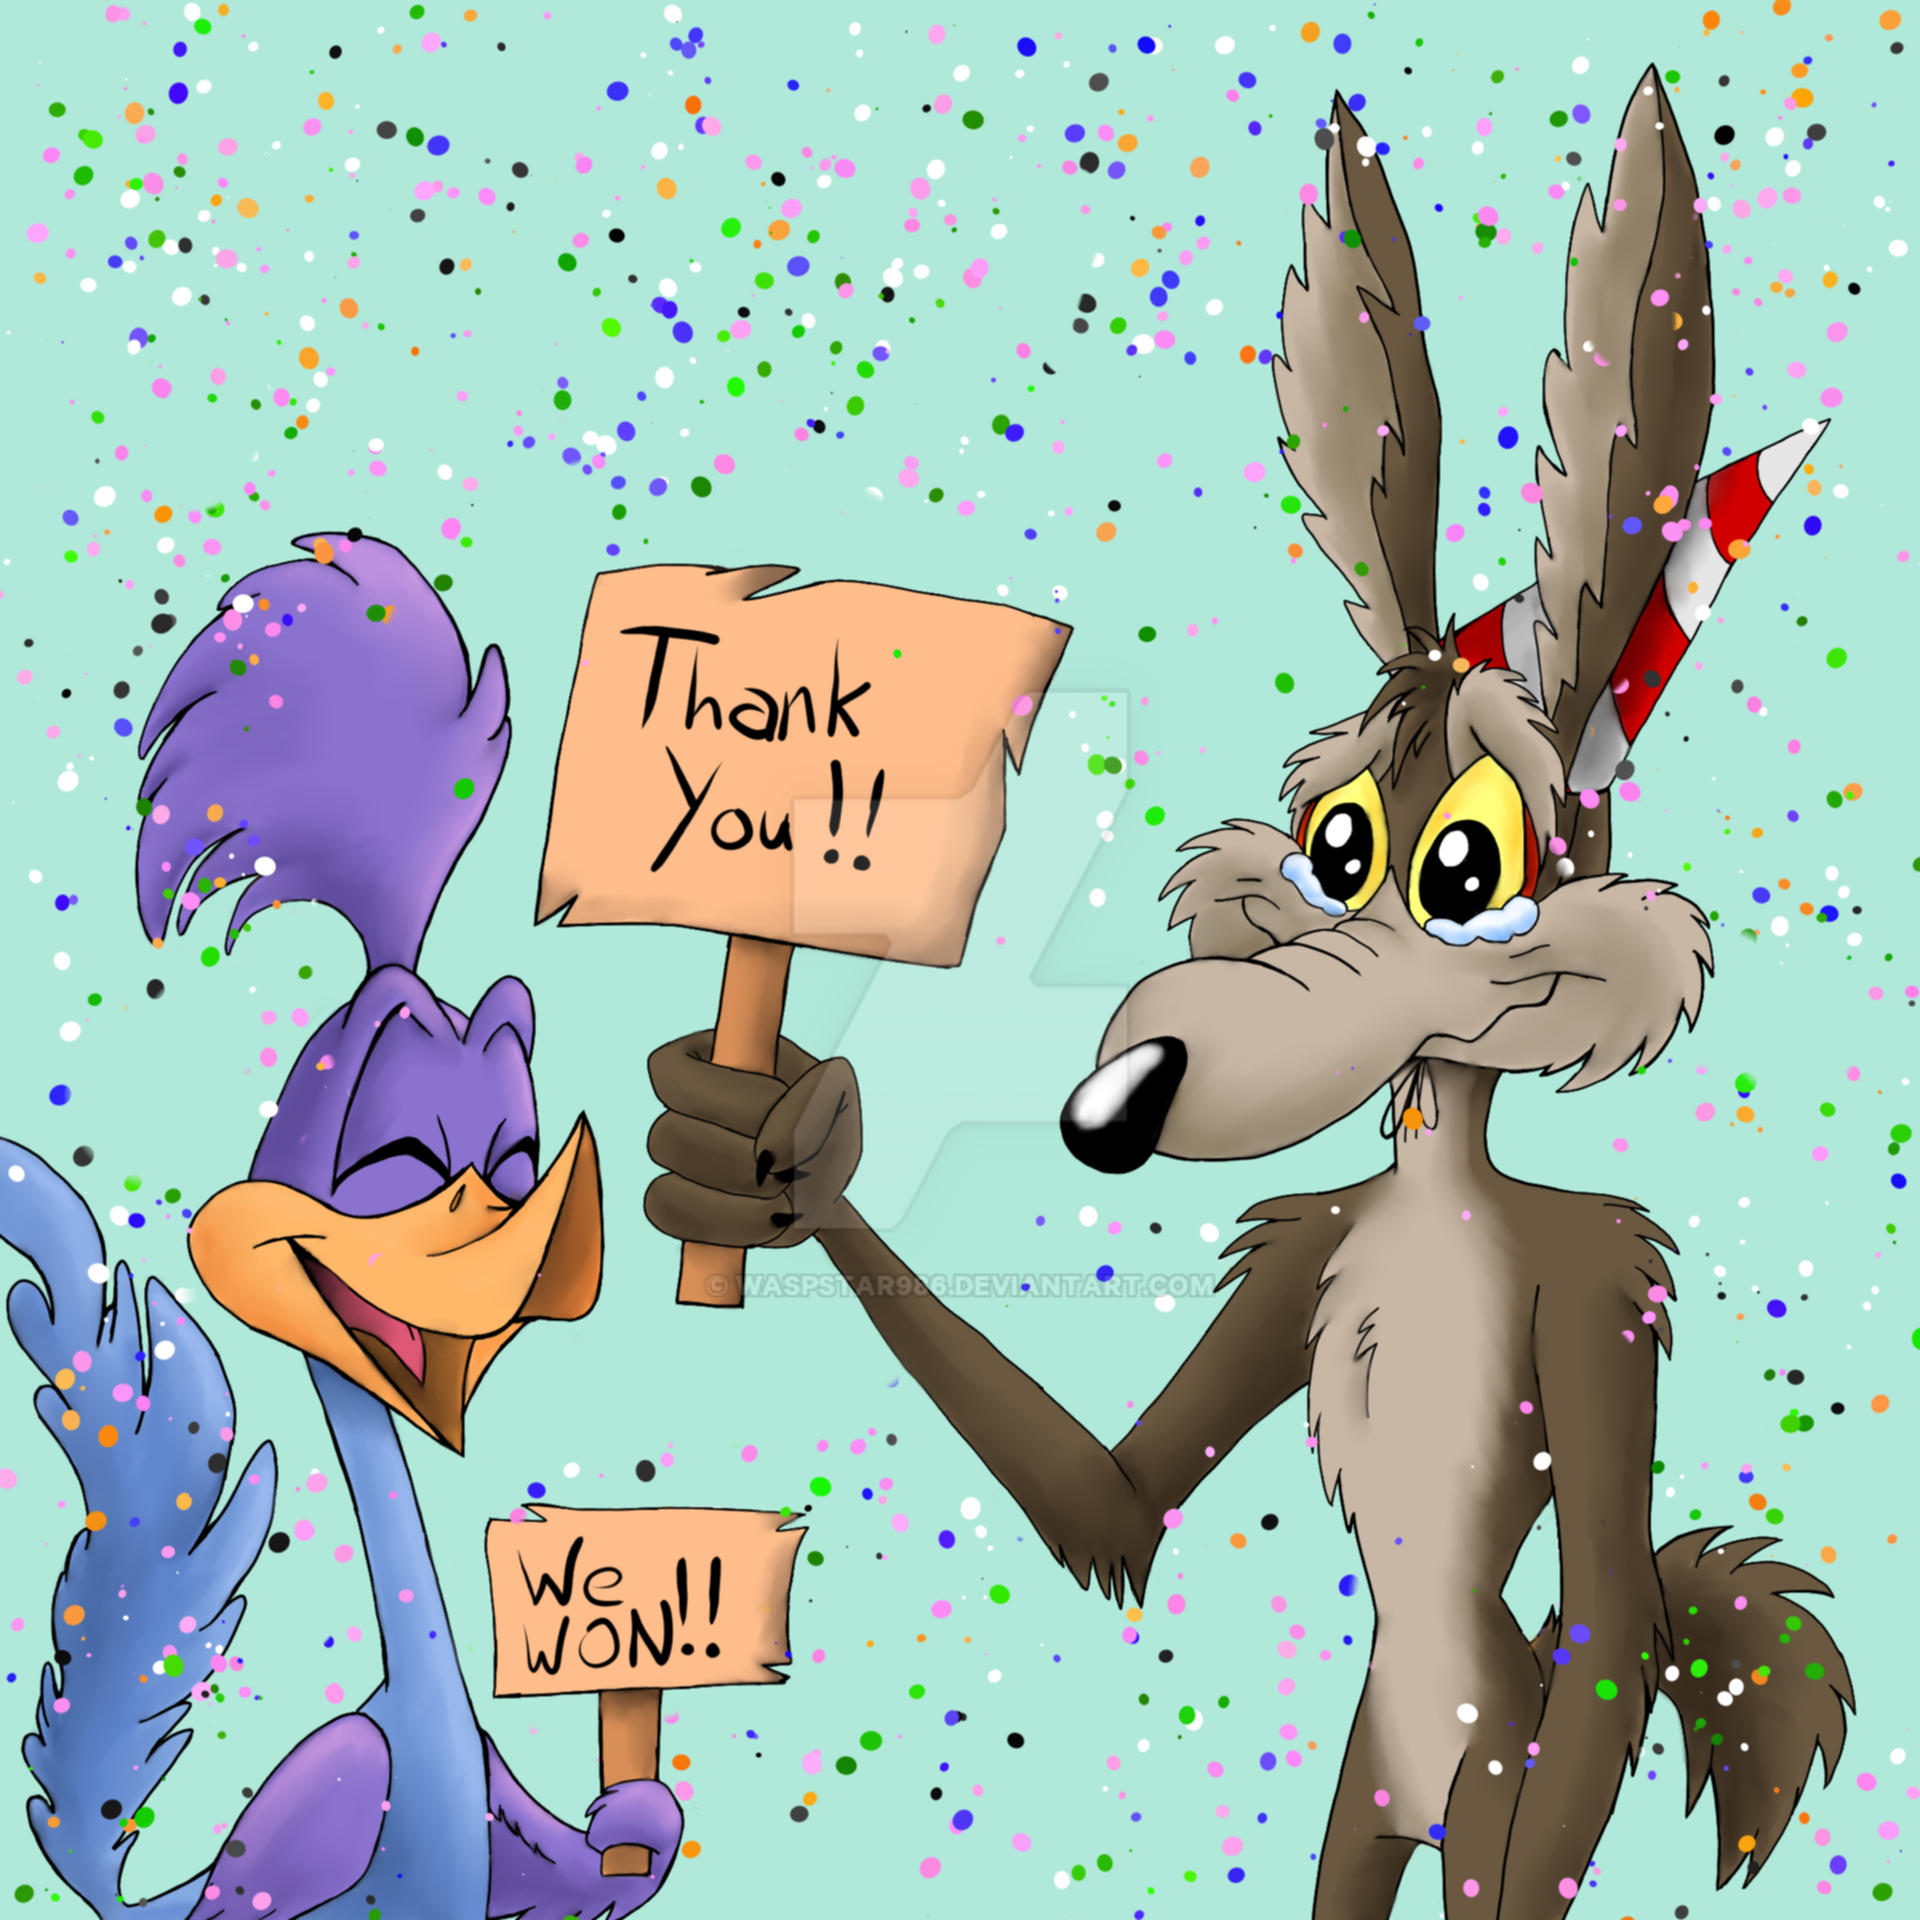 Wile E. Coyote and Beep-Beep Celebrating by Waspstar986 on DeviantArt